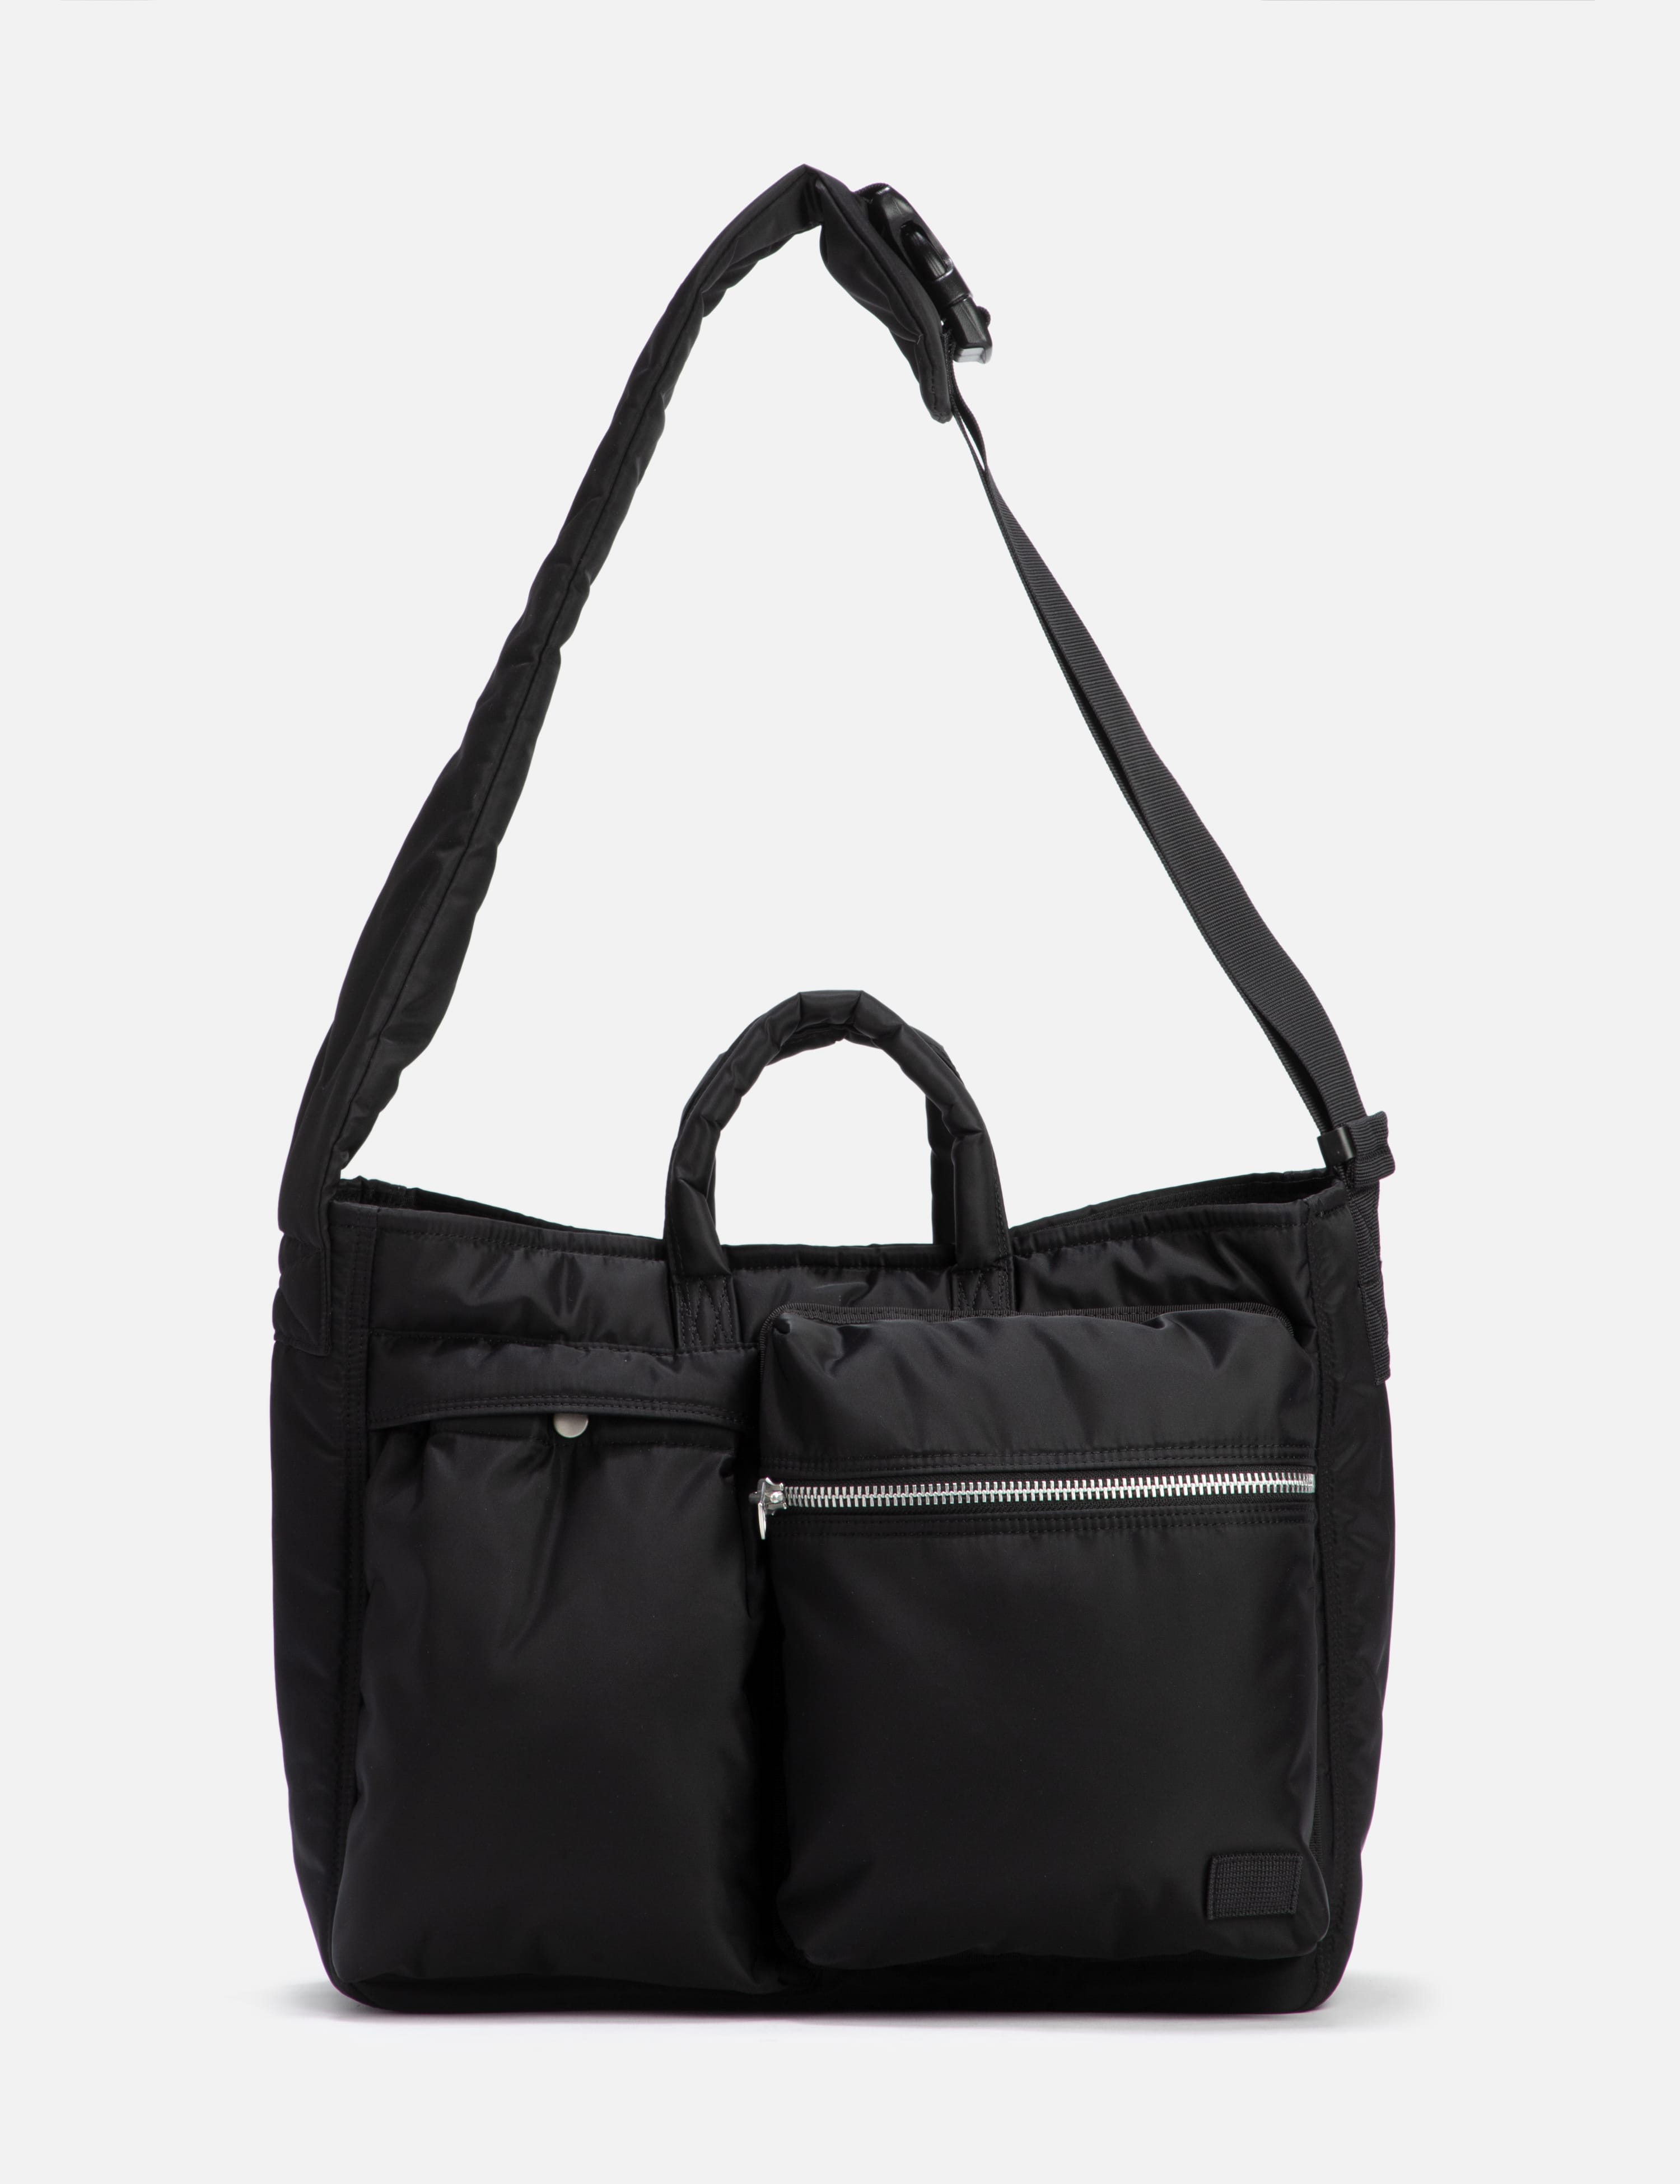 Sacai - Porter Delivery Pocket Bag | HBX - Globally Curated